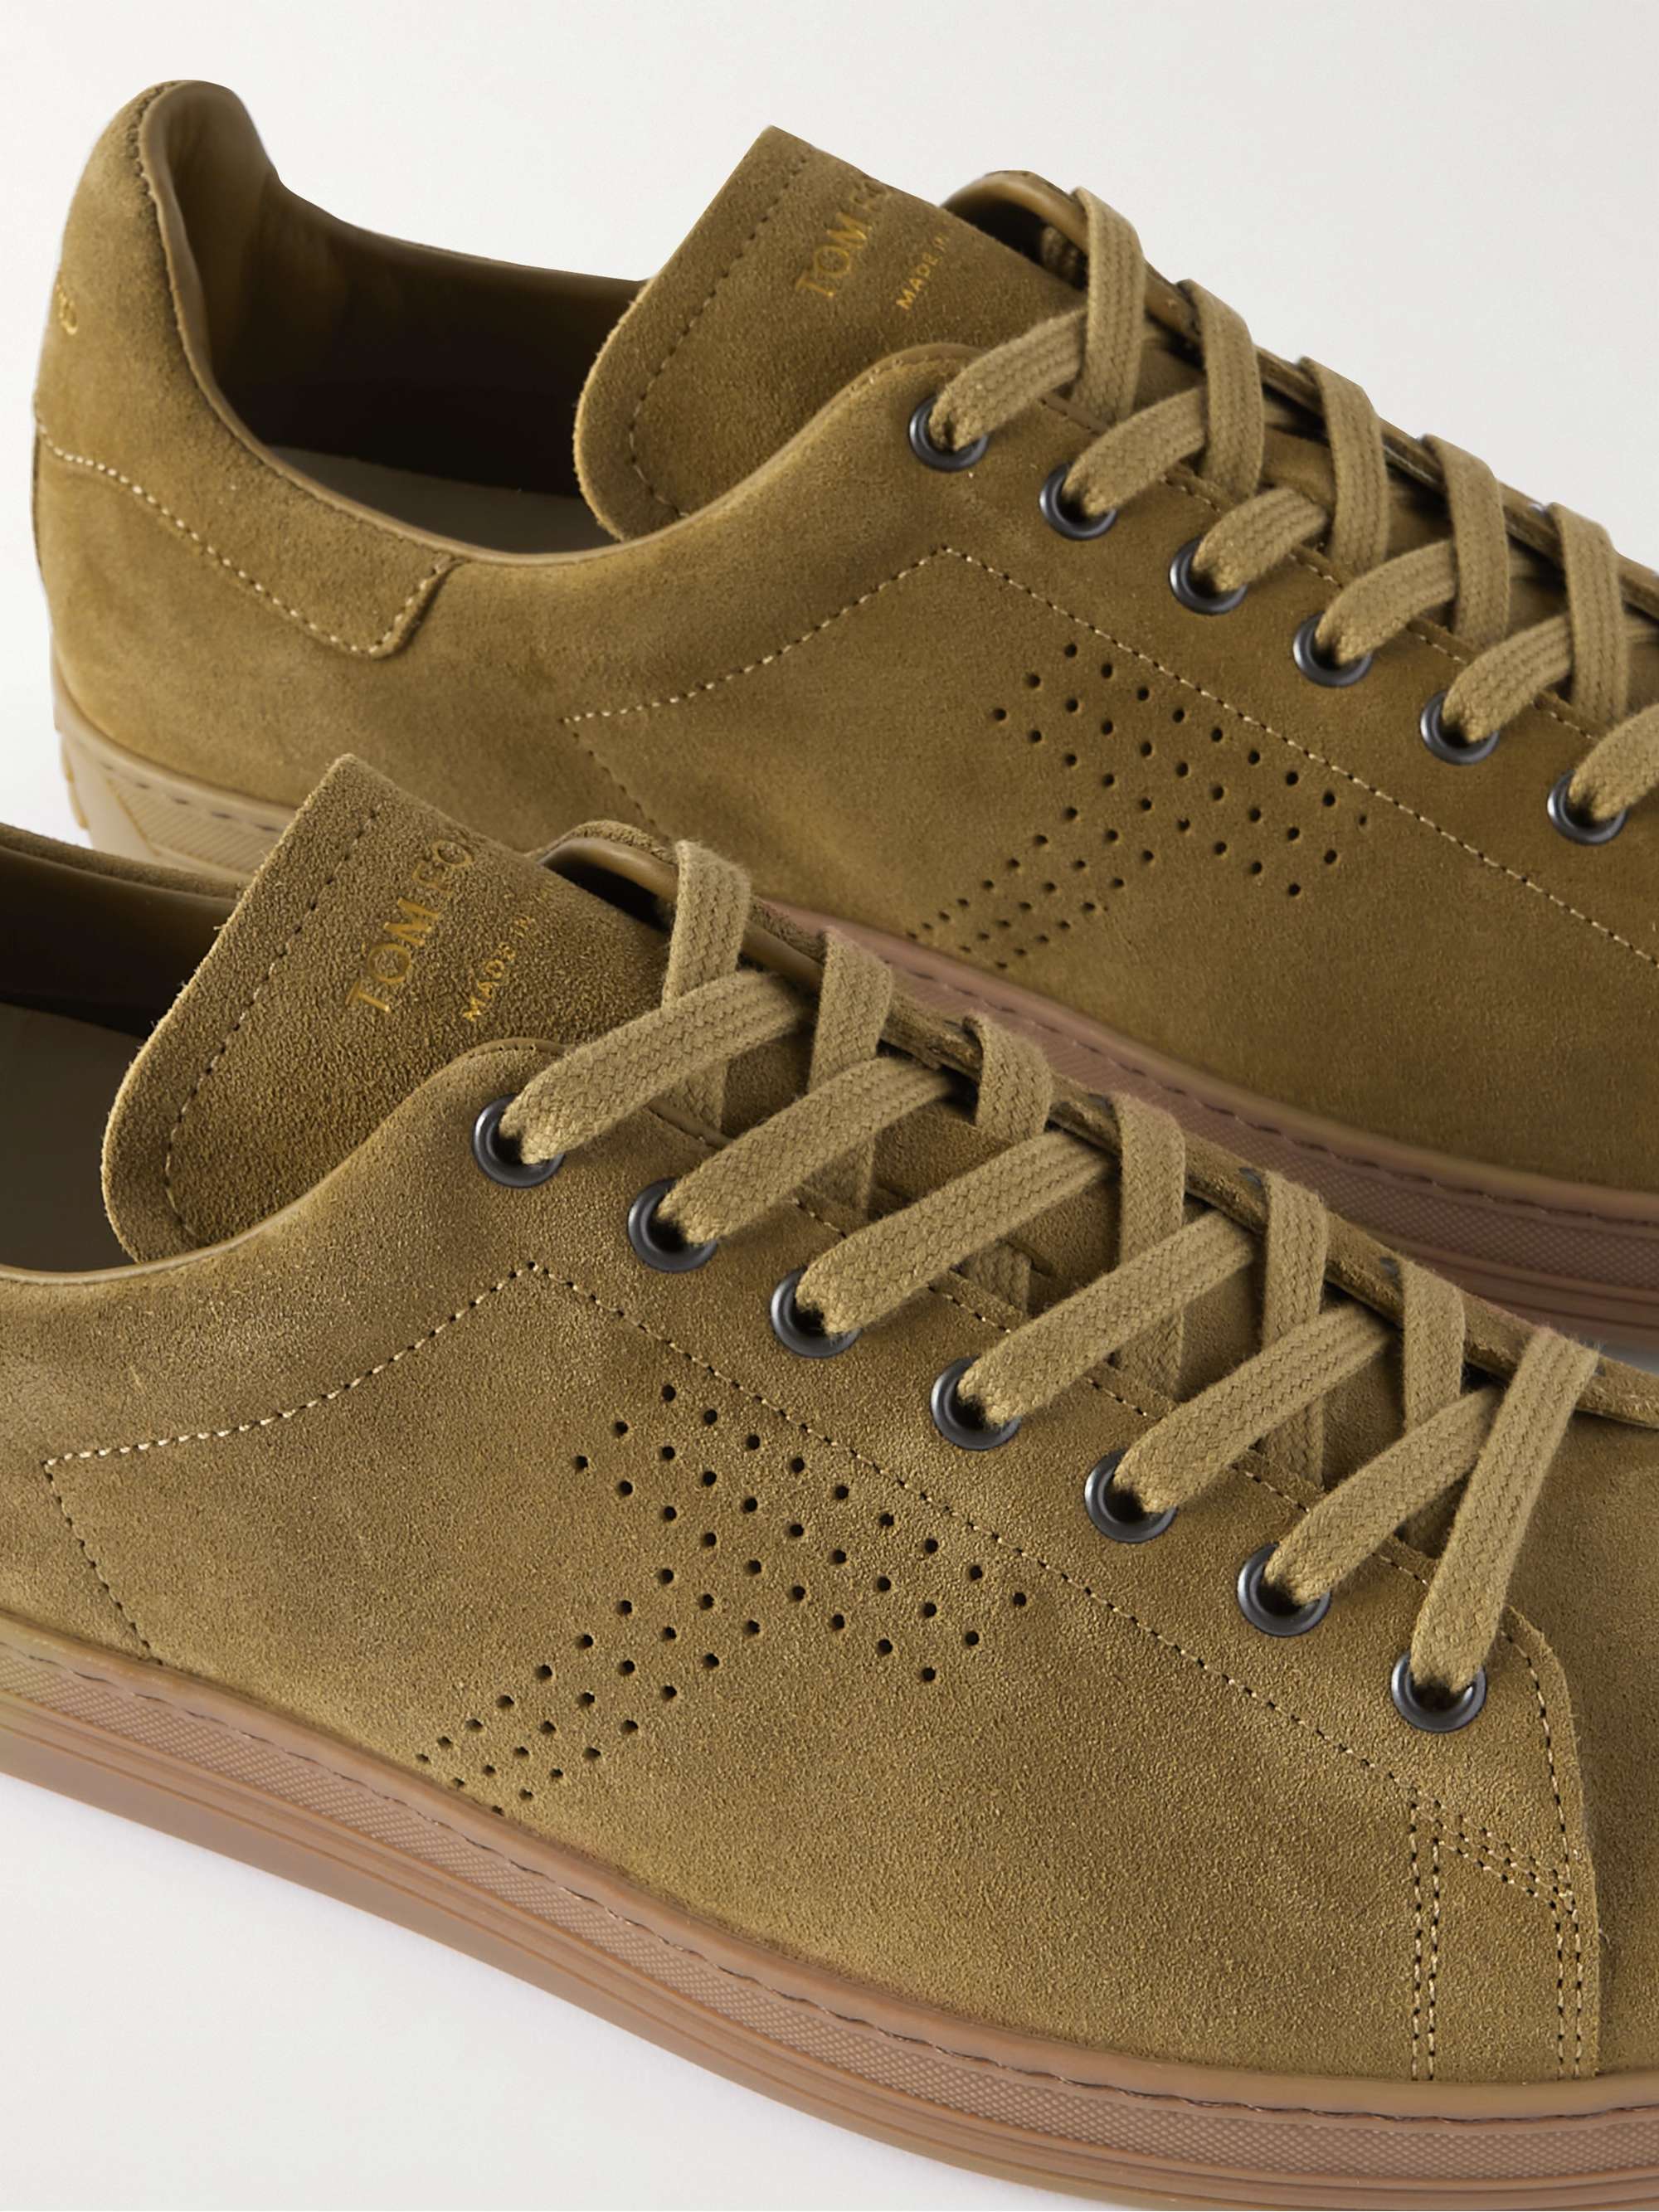 TOM FORD Warwick Perforated Suede Sneakers